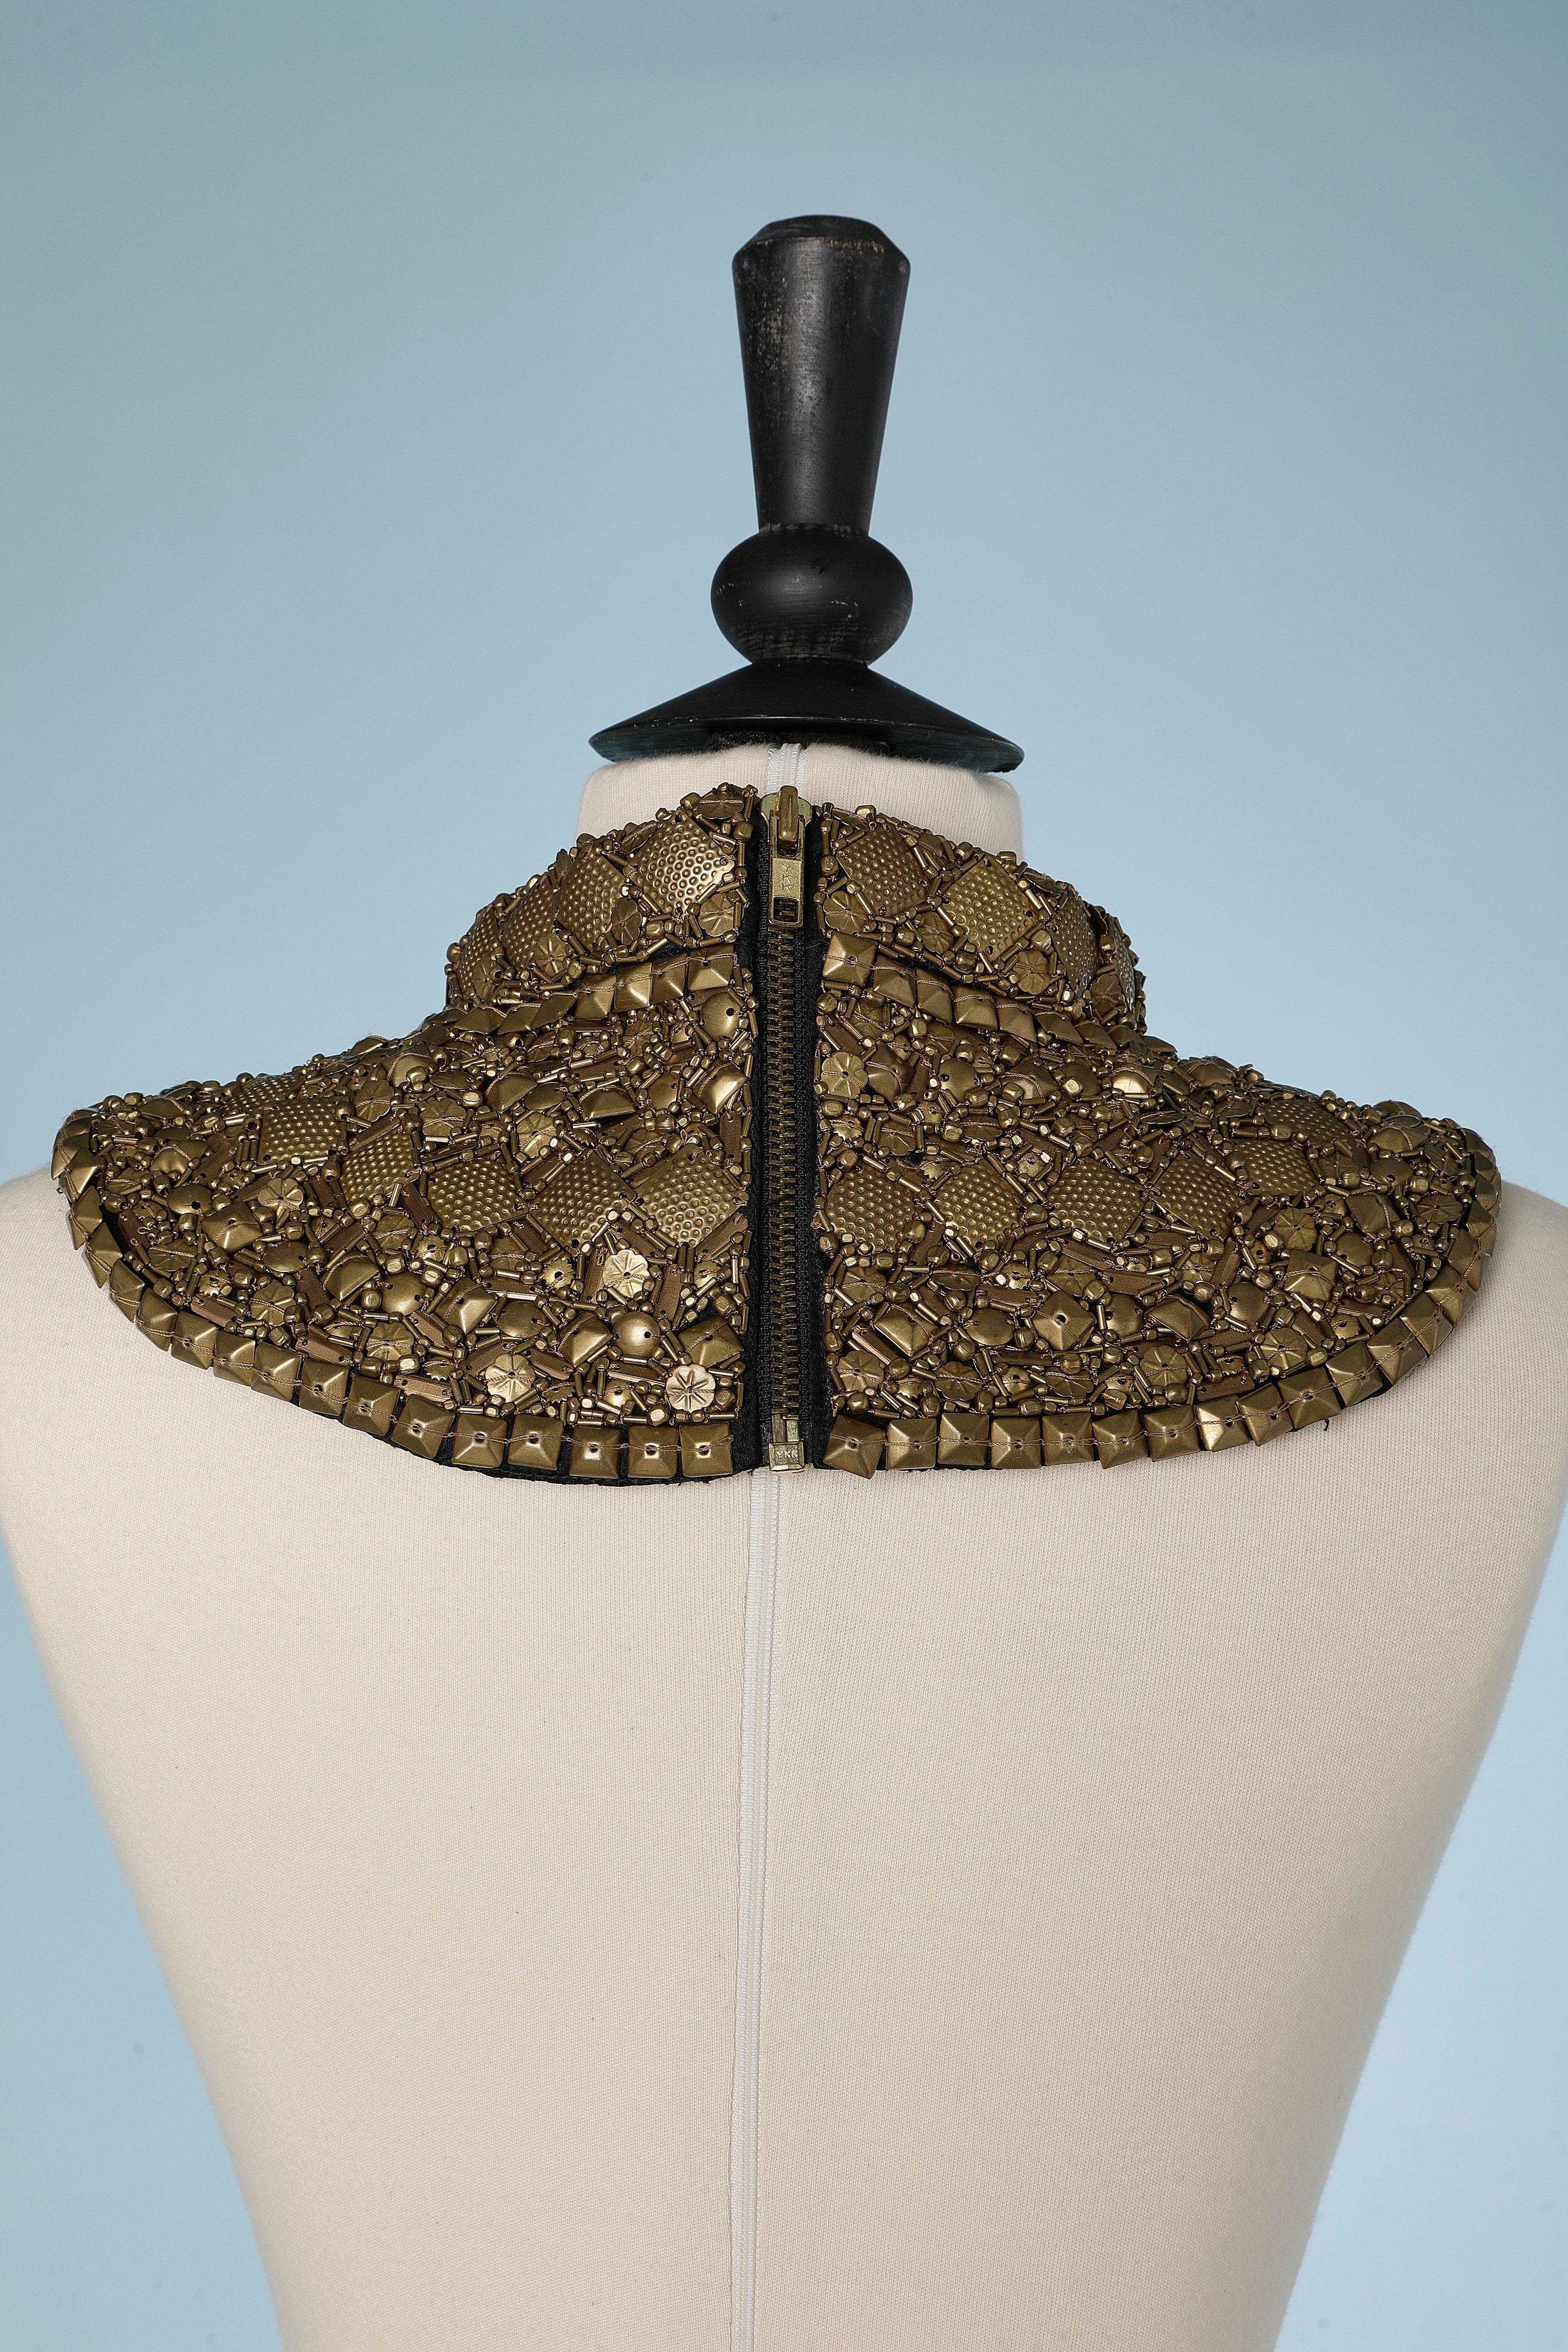 Beige Collar in metallic beads and zip in the middle back Peachboo + Krejberg For Sale